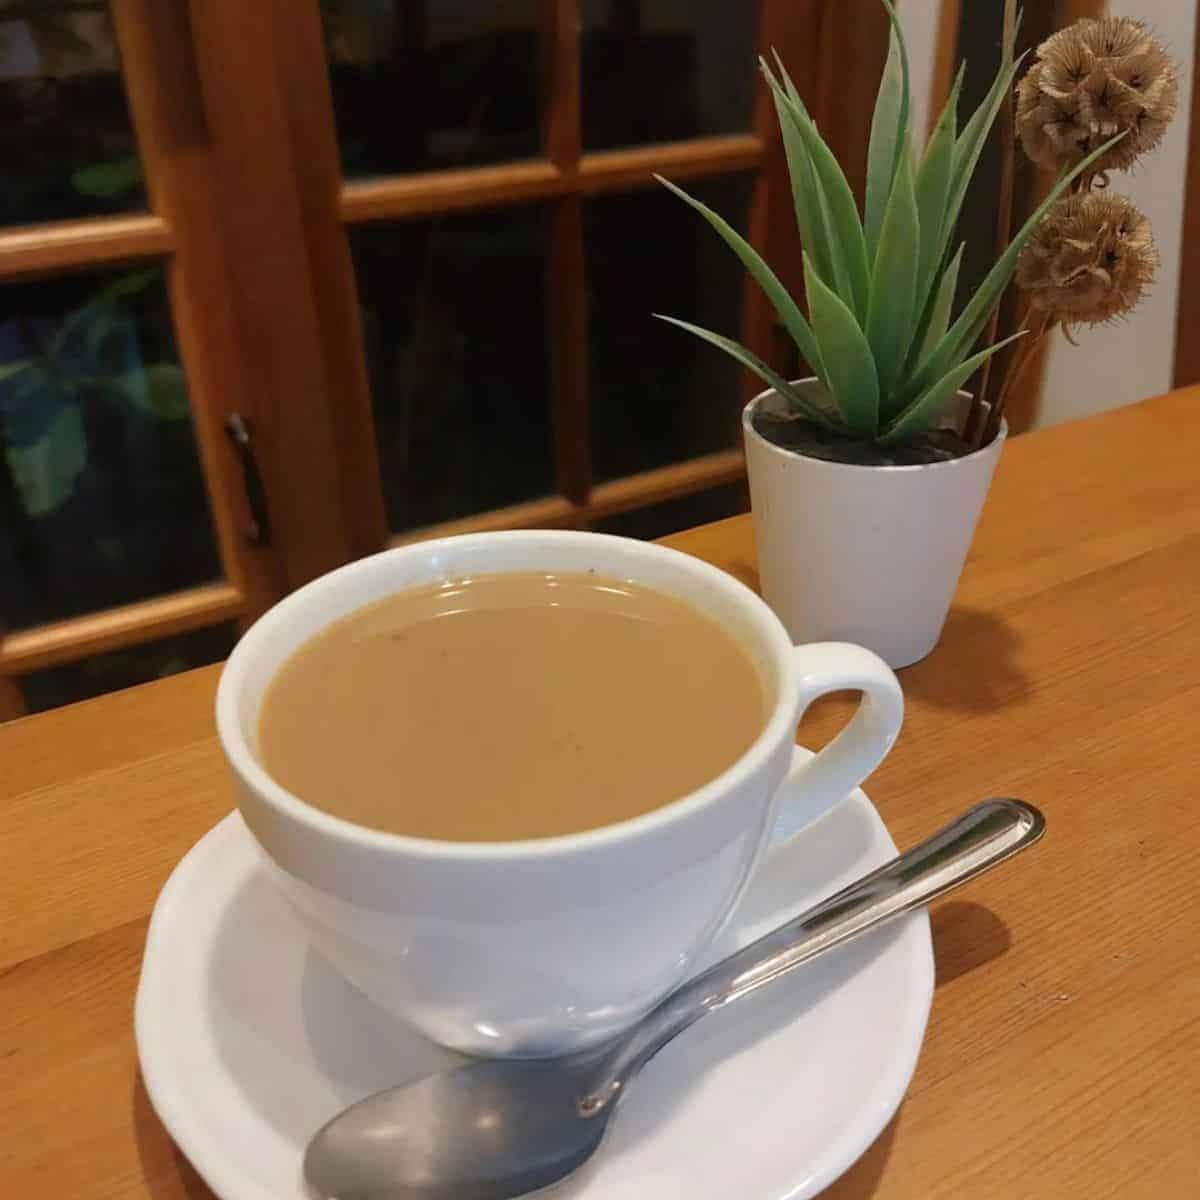 Smooth texture and aromatic cup of tea in a white cup